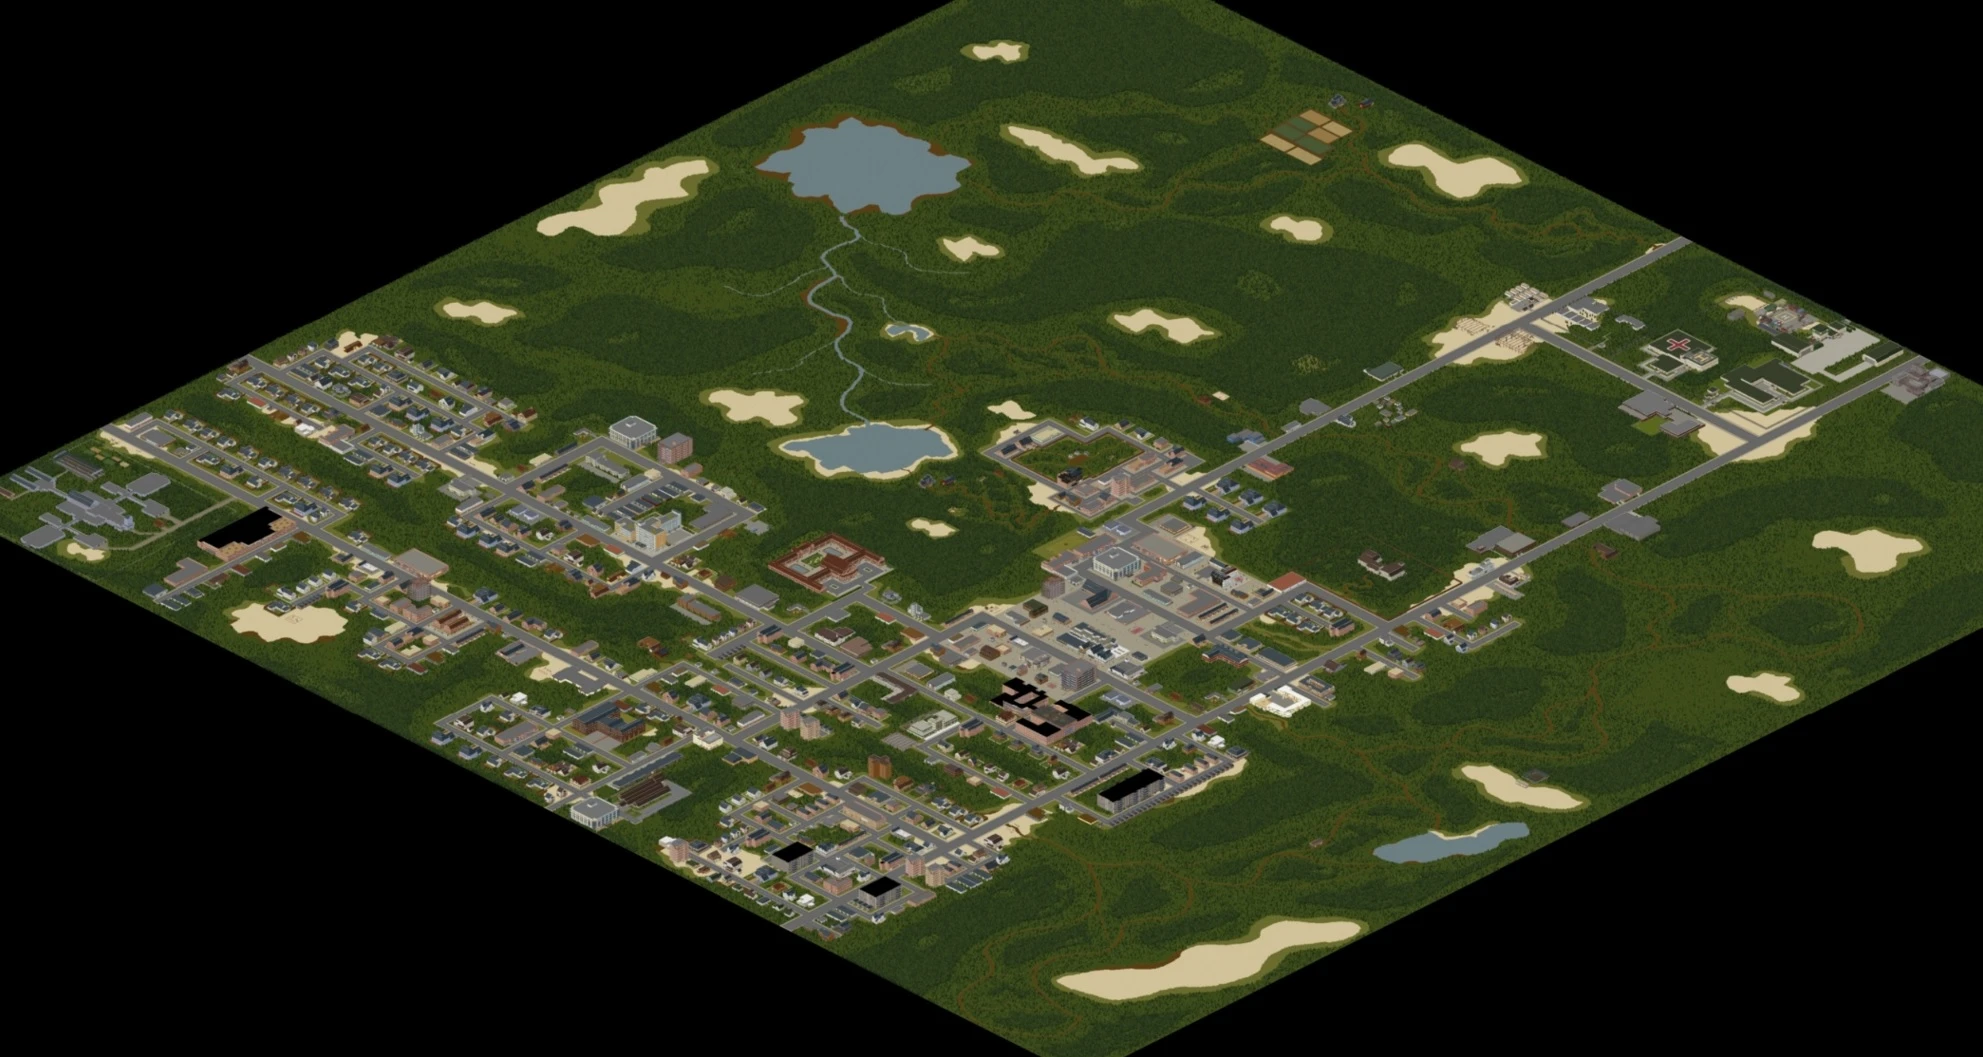 project zomboid map download